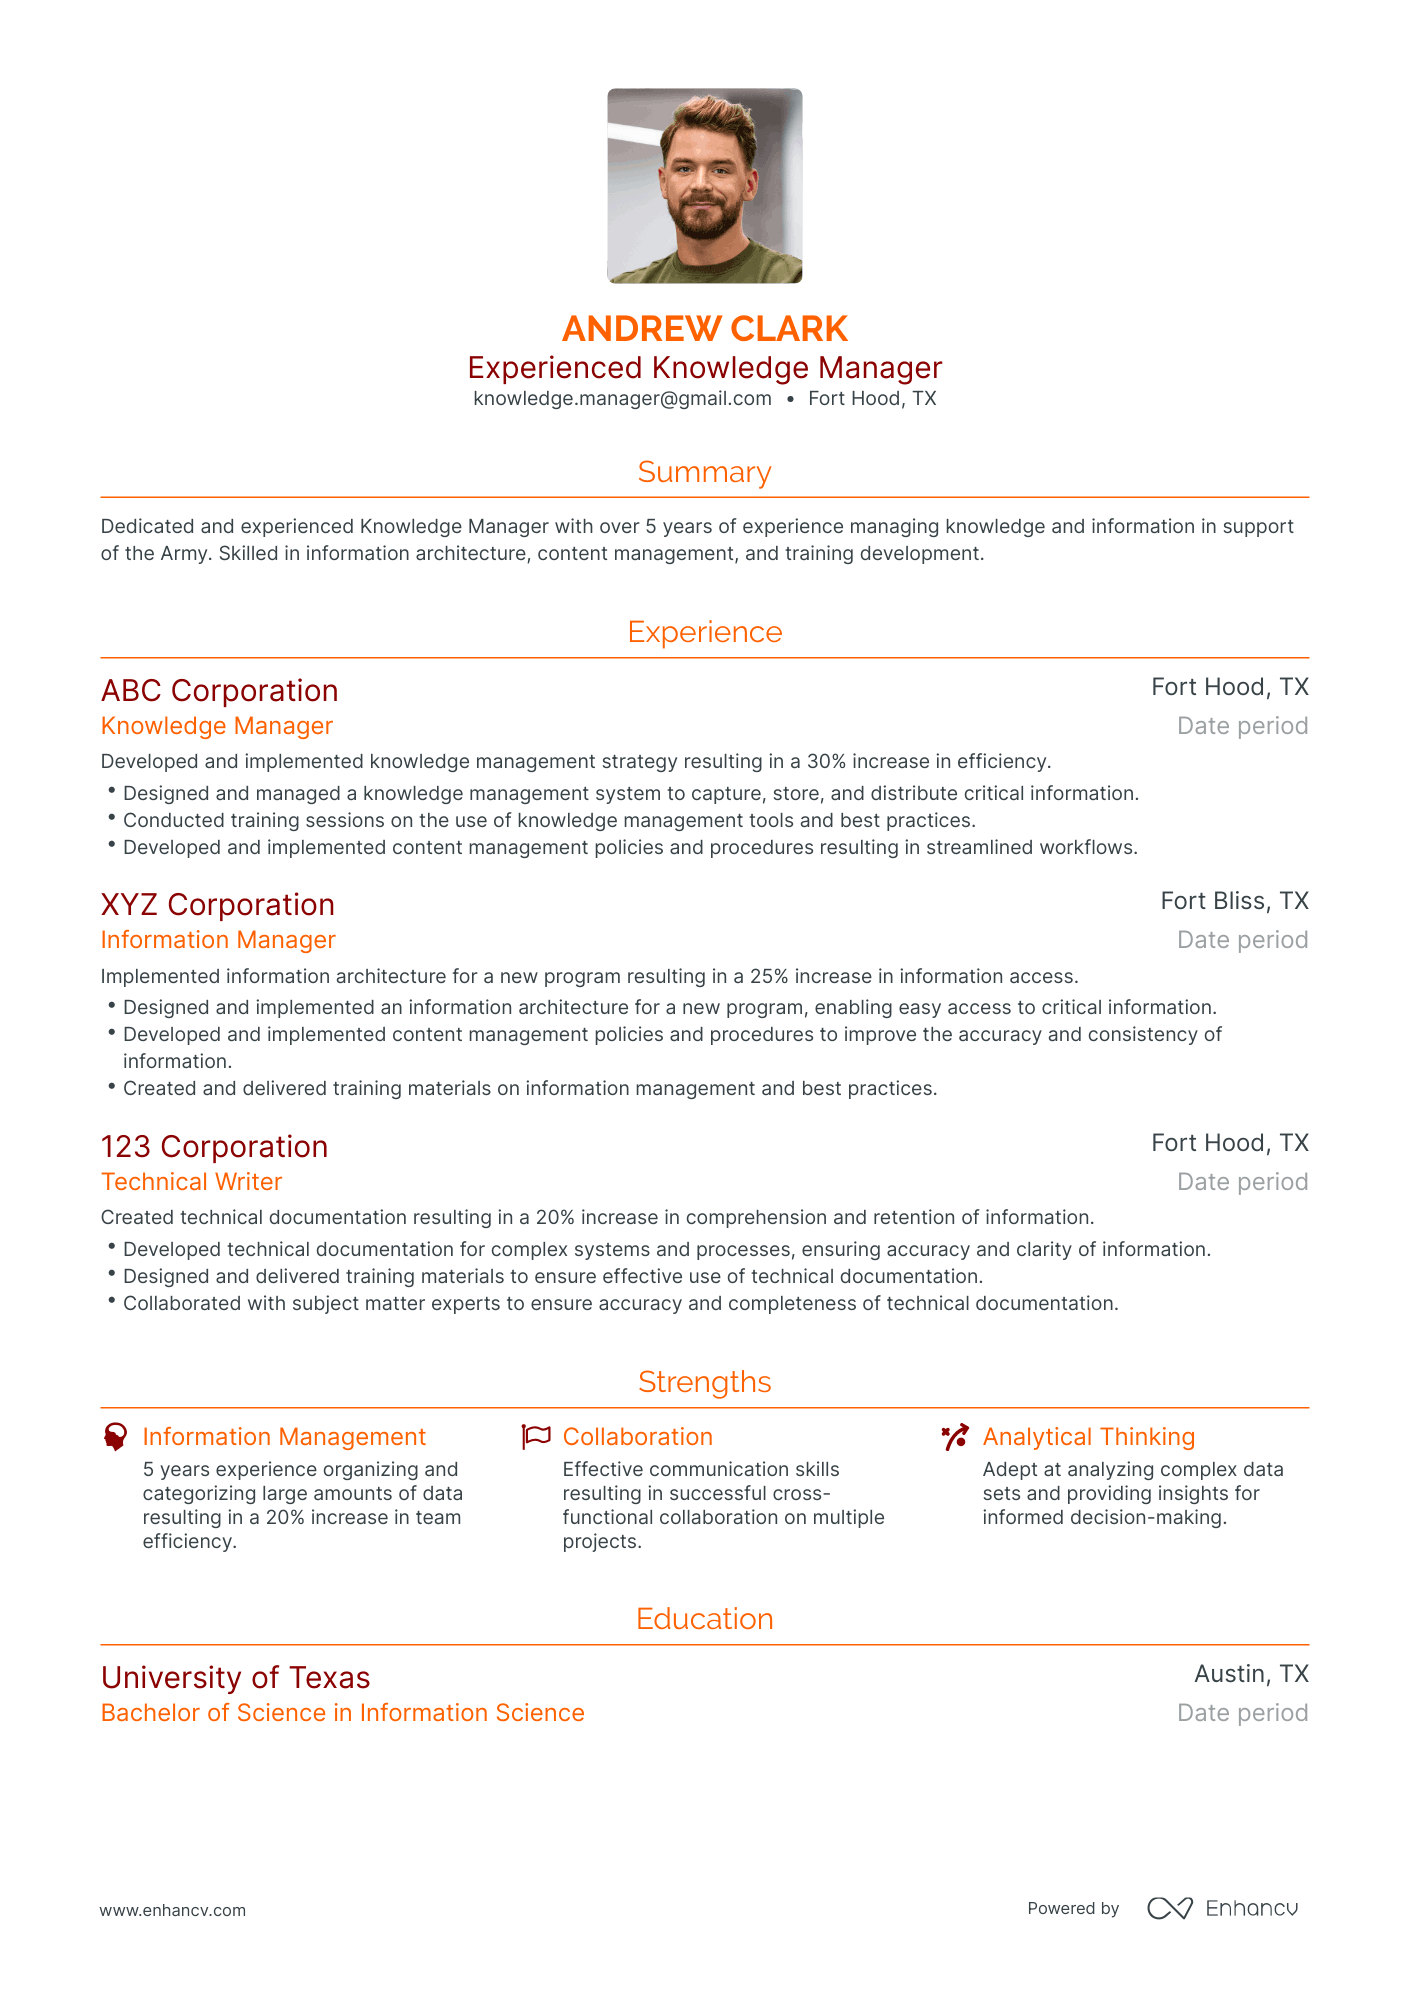 Traditional Knowledge Manager Resume Template